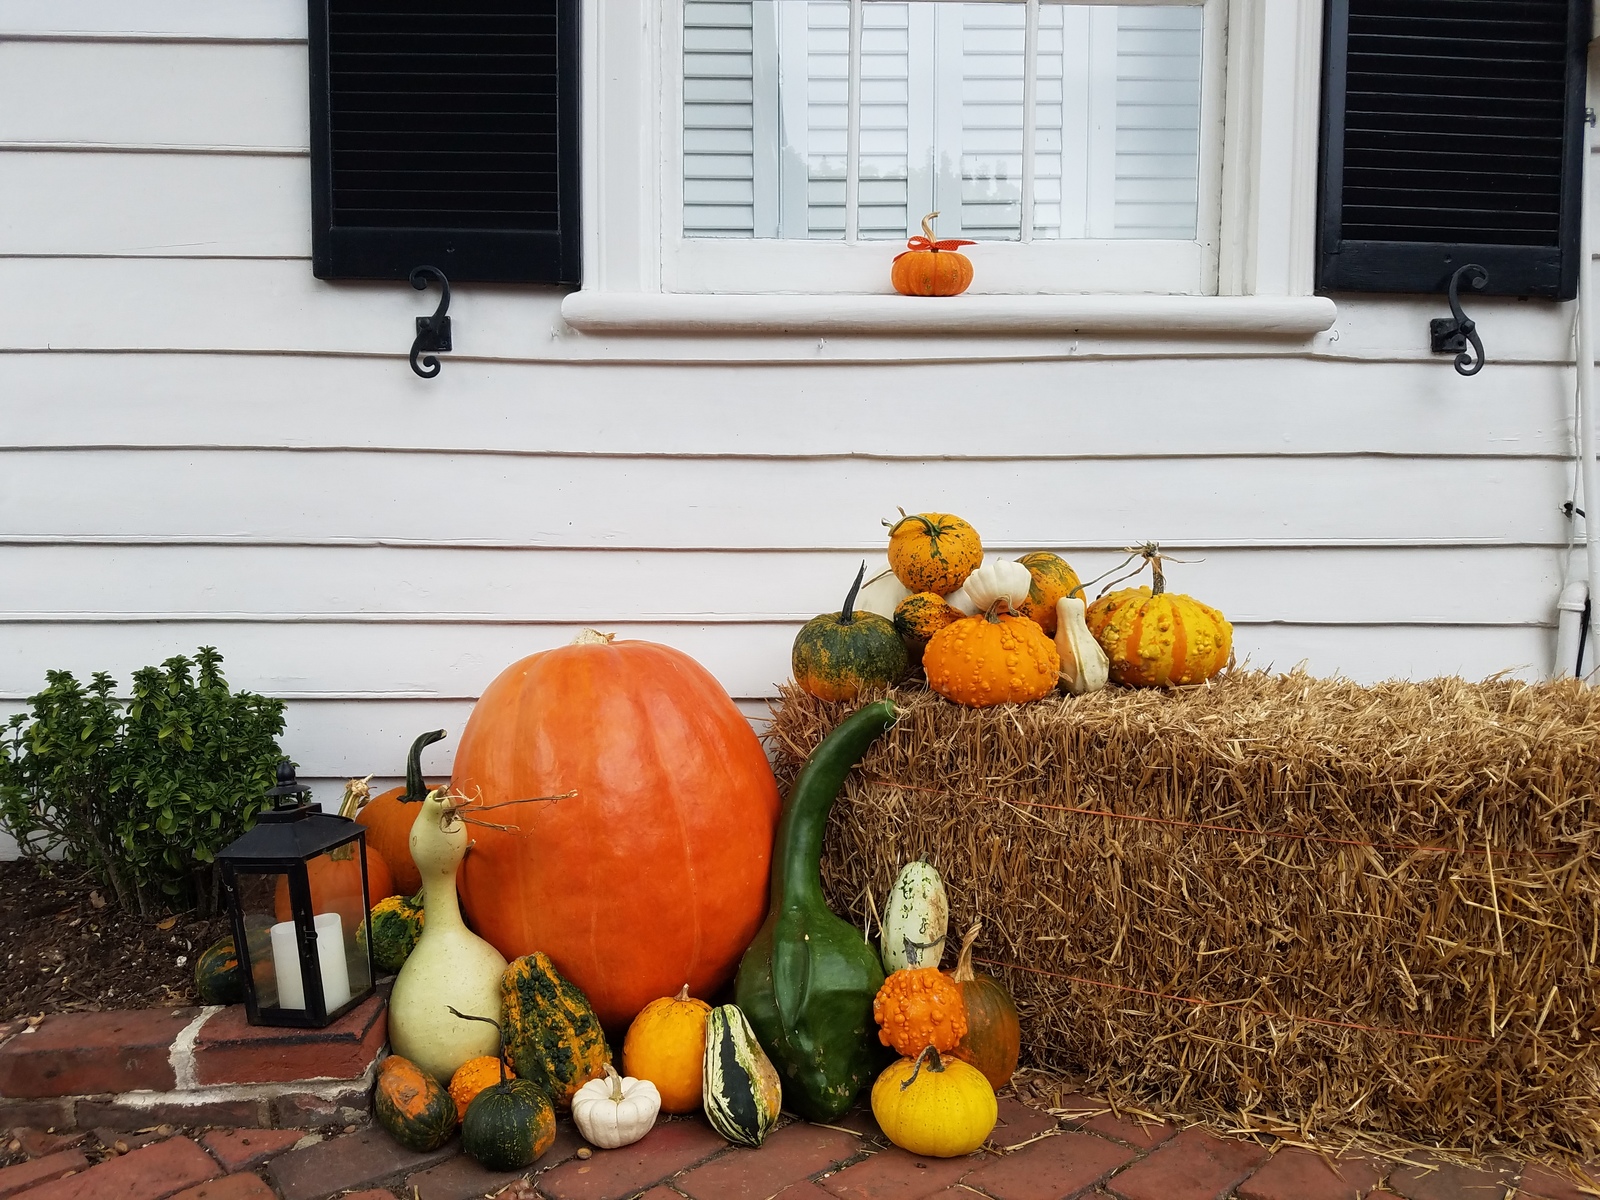 33031934_pumpkins-and-gourds-on-hay-or-straw-bale-and-white-house